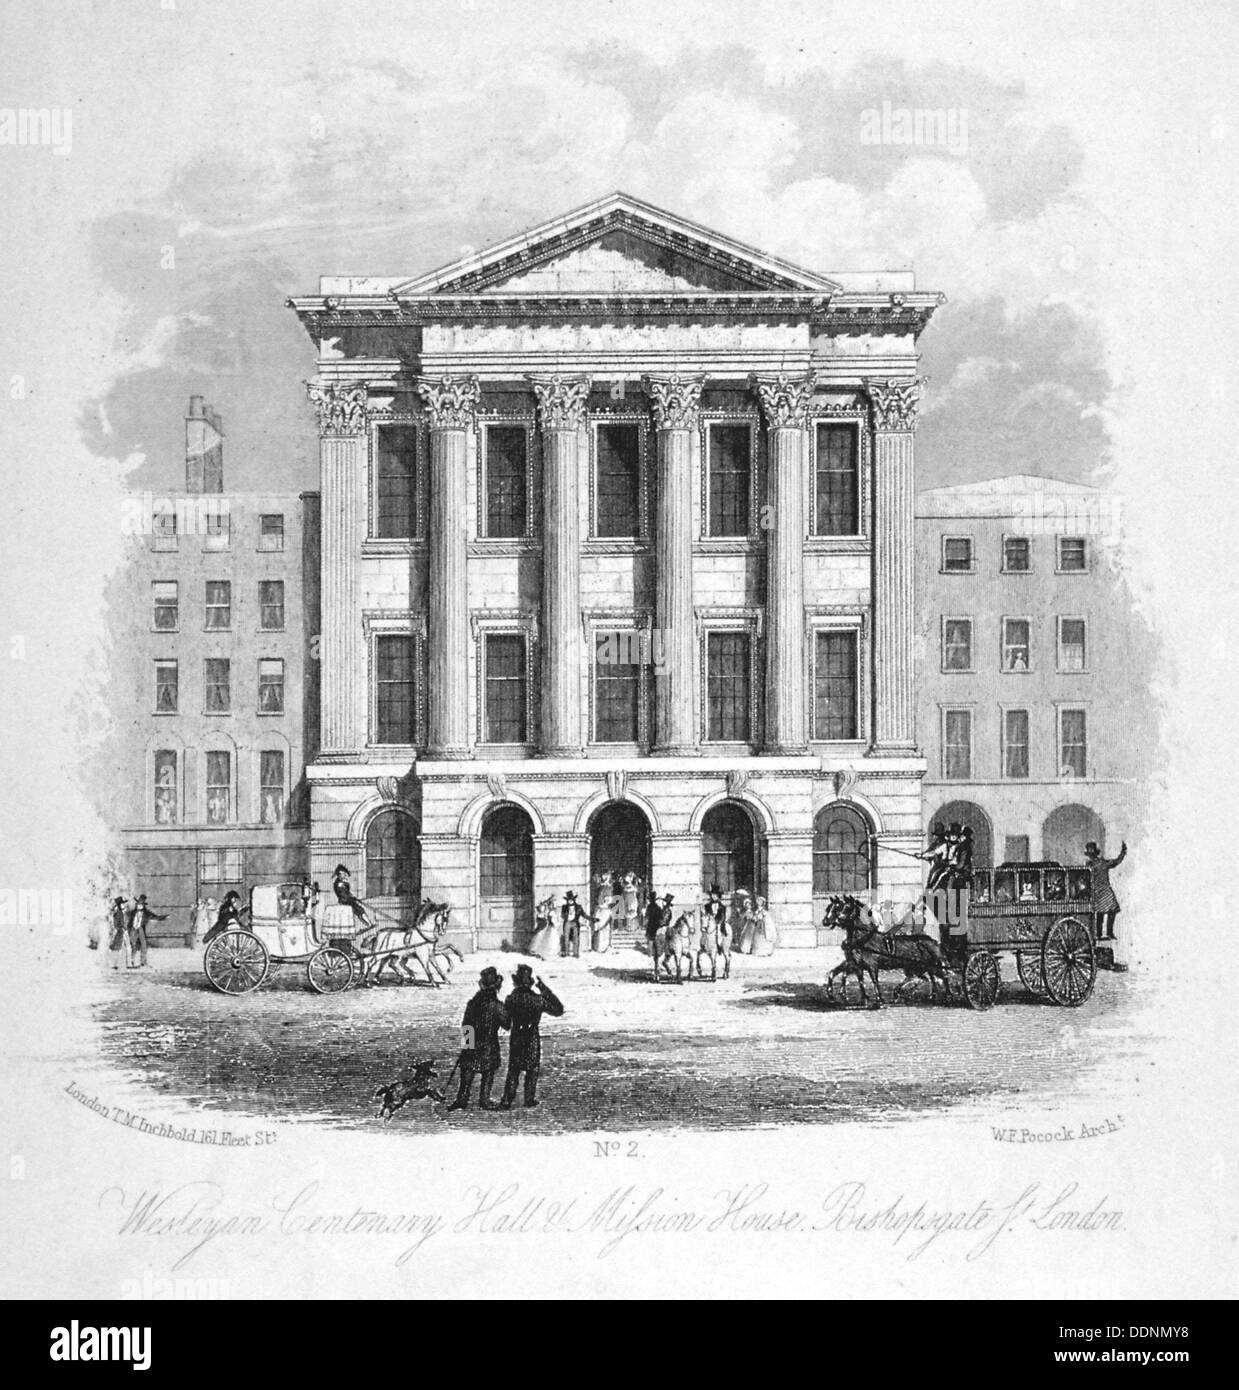 The Wesleyan Centenary Hall and Mission House, Bishopsgate, City of London, 1840. Artist: Anon Stock Photo